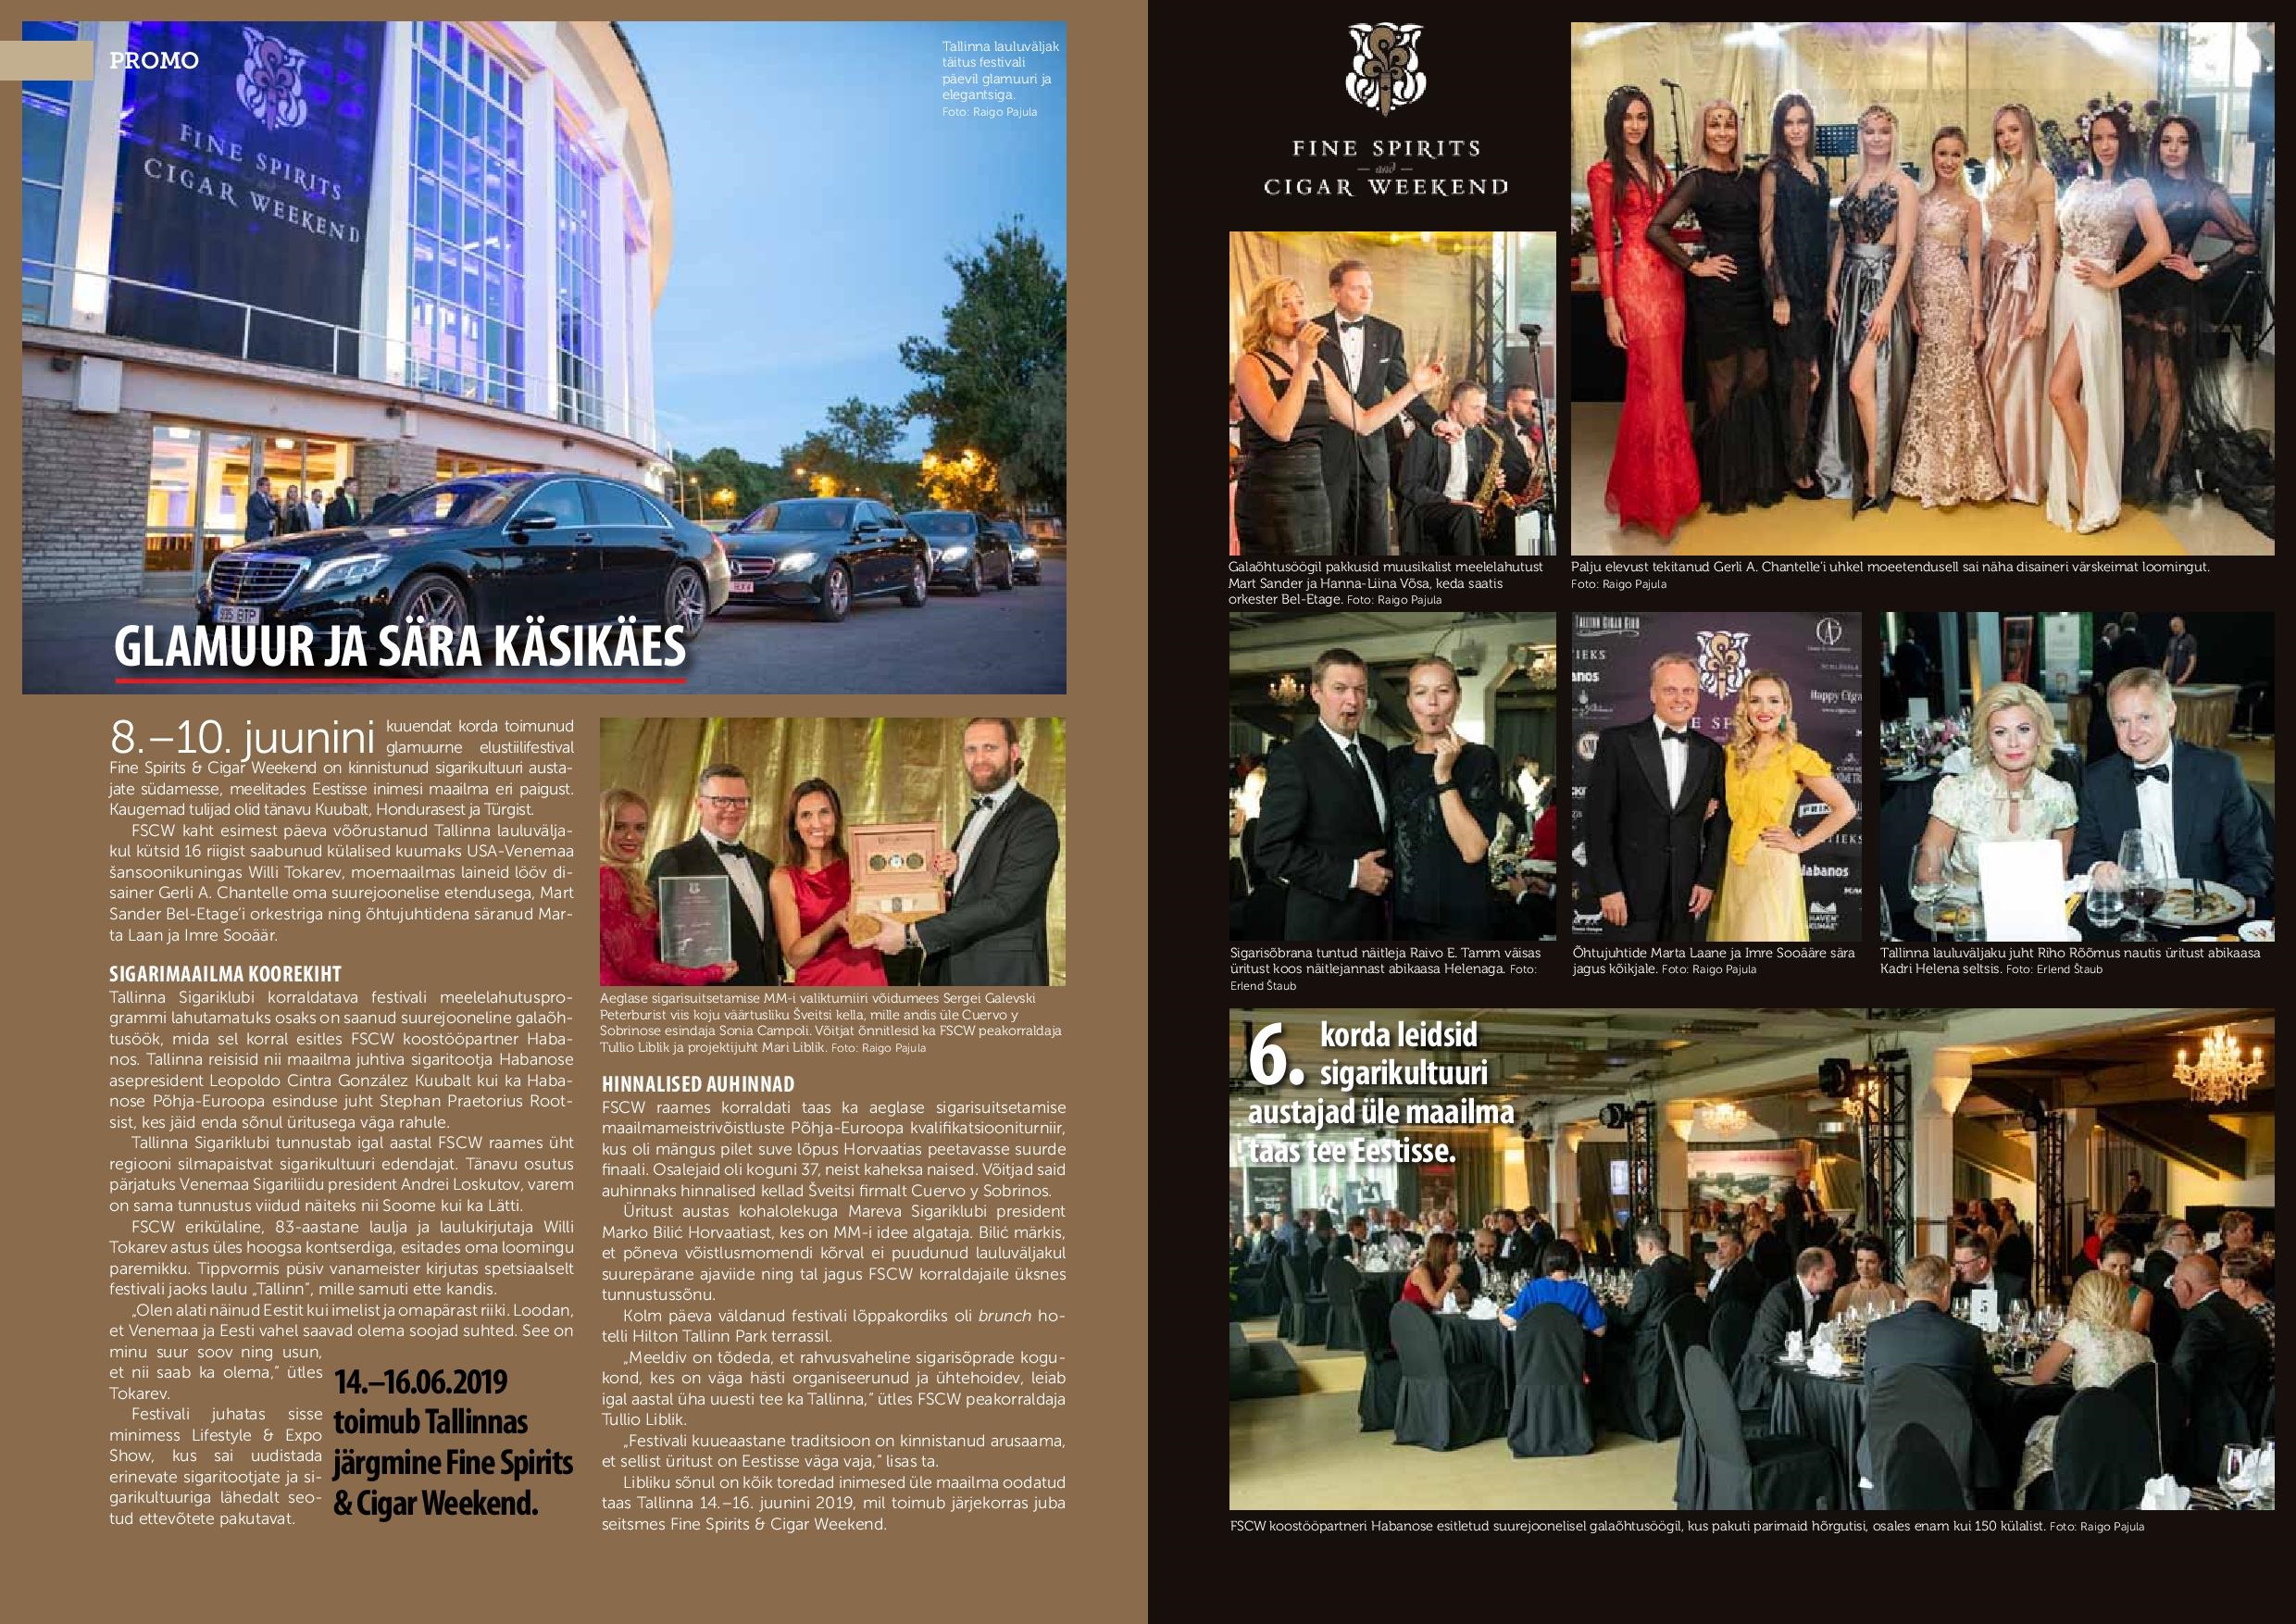 Magazine Pulss covered the Fine Spirits & Cigar Weekend